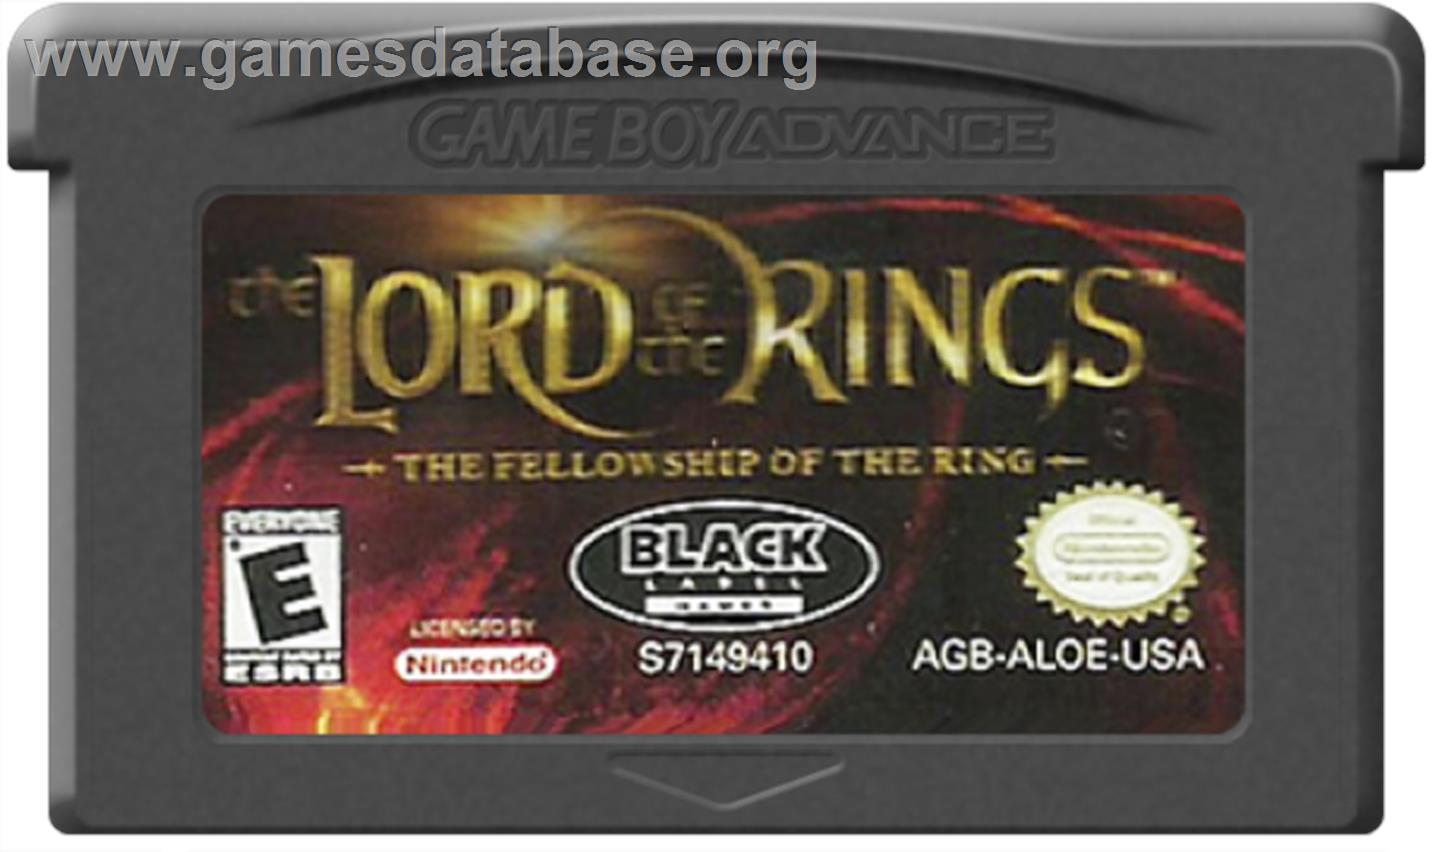 Lord of the Rings: The Fellowship of the Ring - Nintendo Game Boy Advance - Artwork - Cartridge